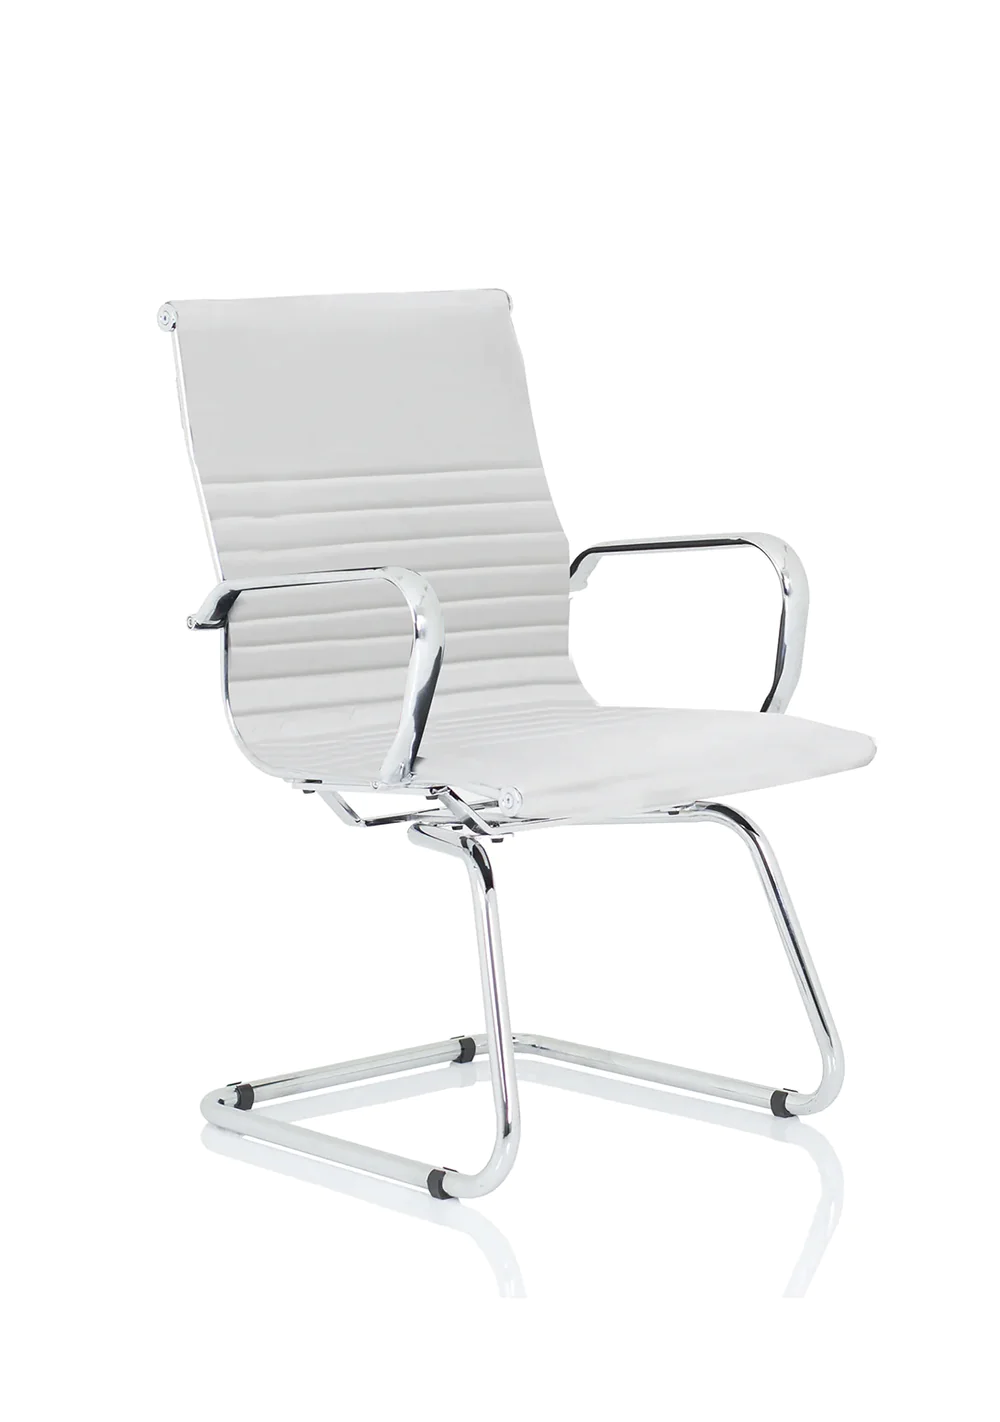 Nola Designer Chrome Cantilever Chair White Faux Leather Ribbed High Back